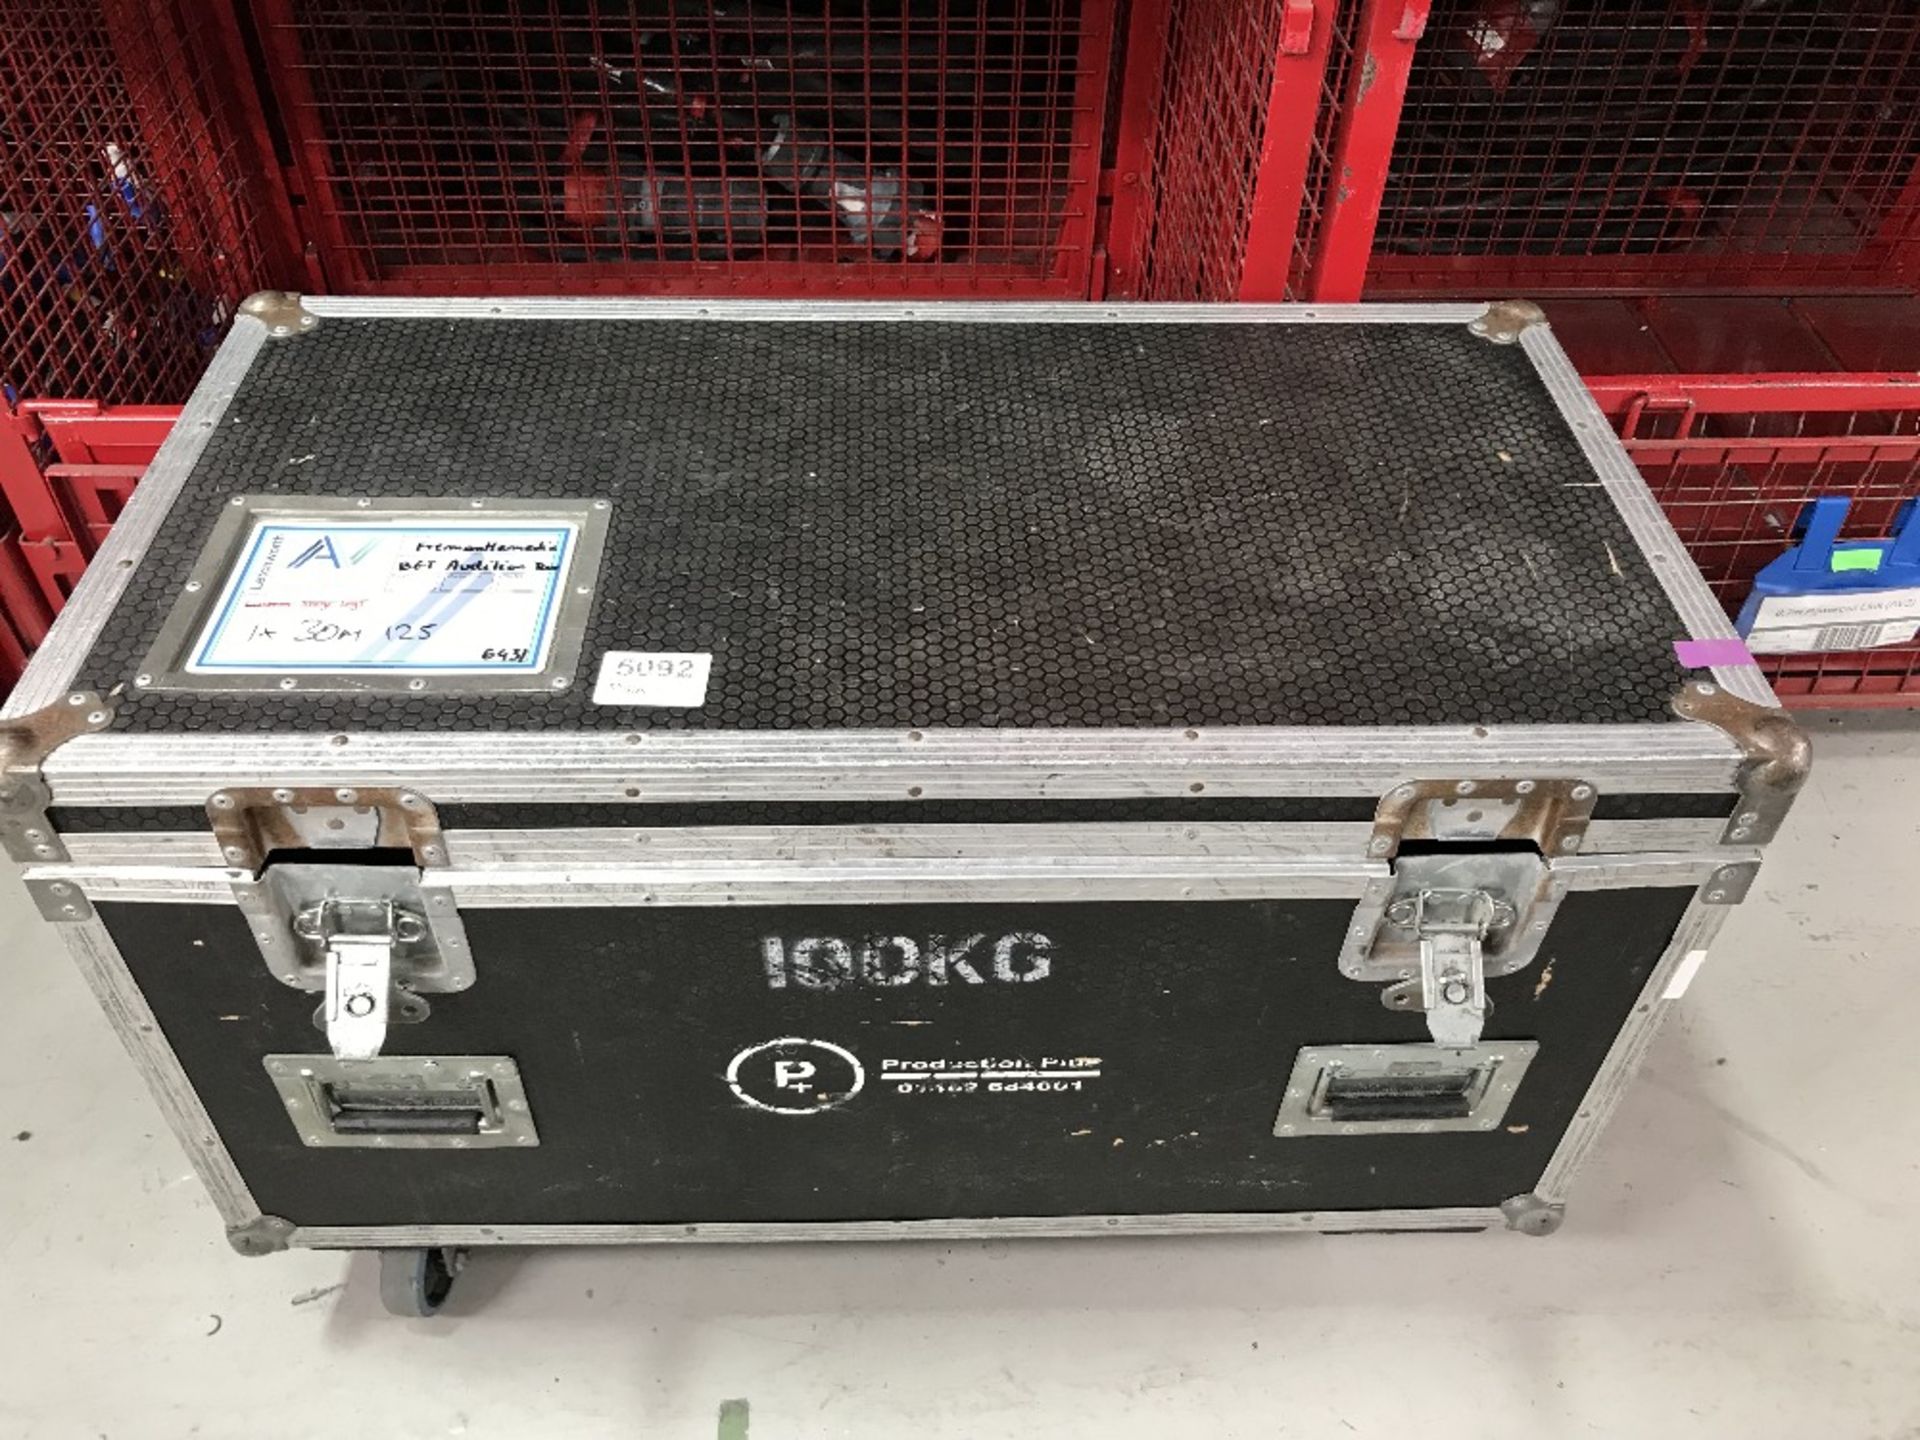 30m 125/3 Cable With Heavy Duty Mobile Flight Case - Image 2 of 2